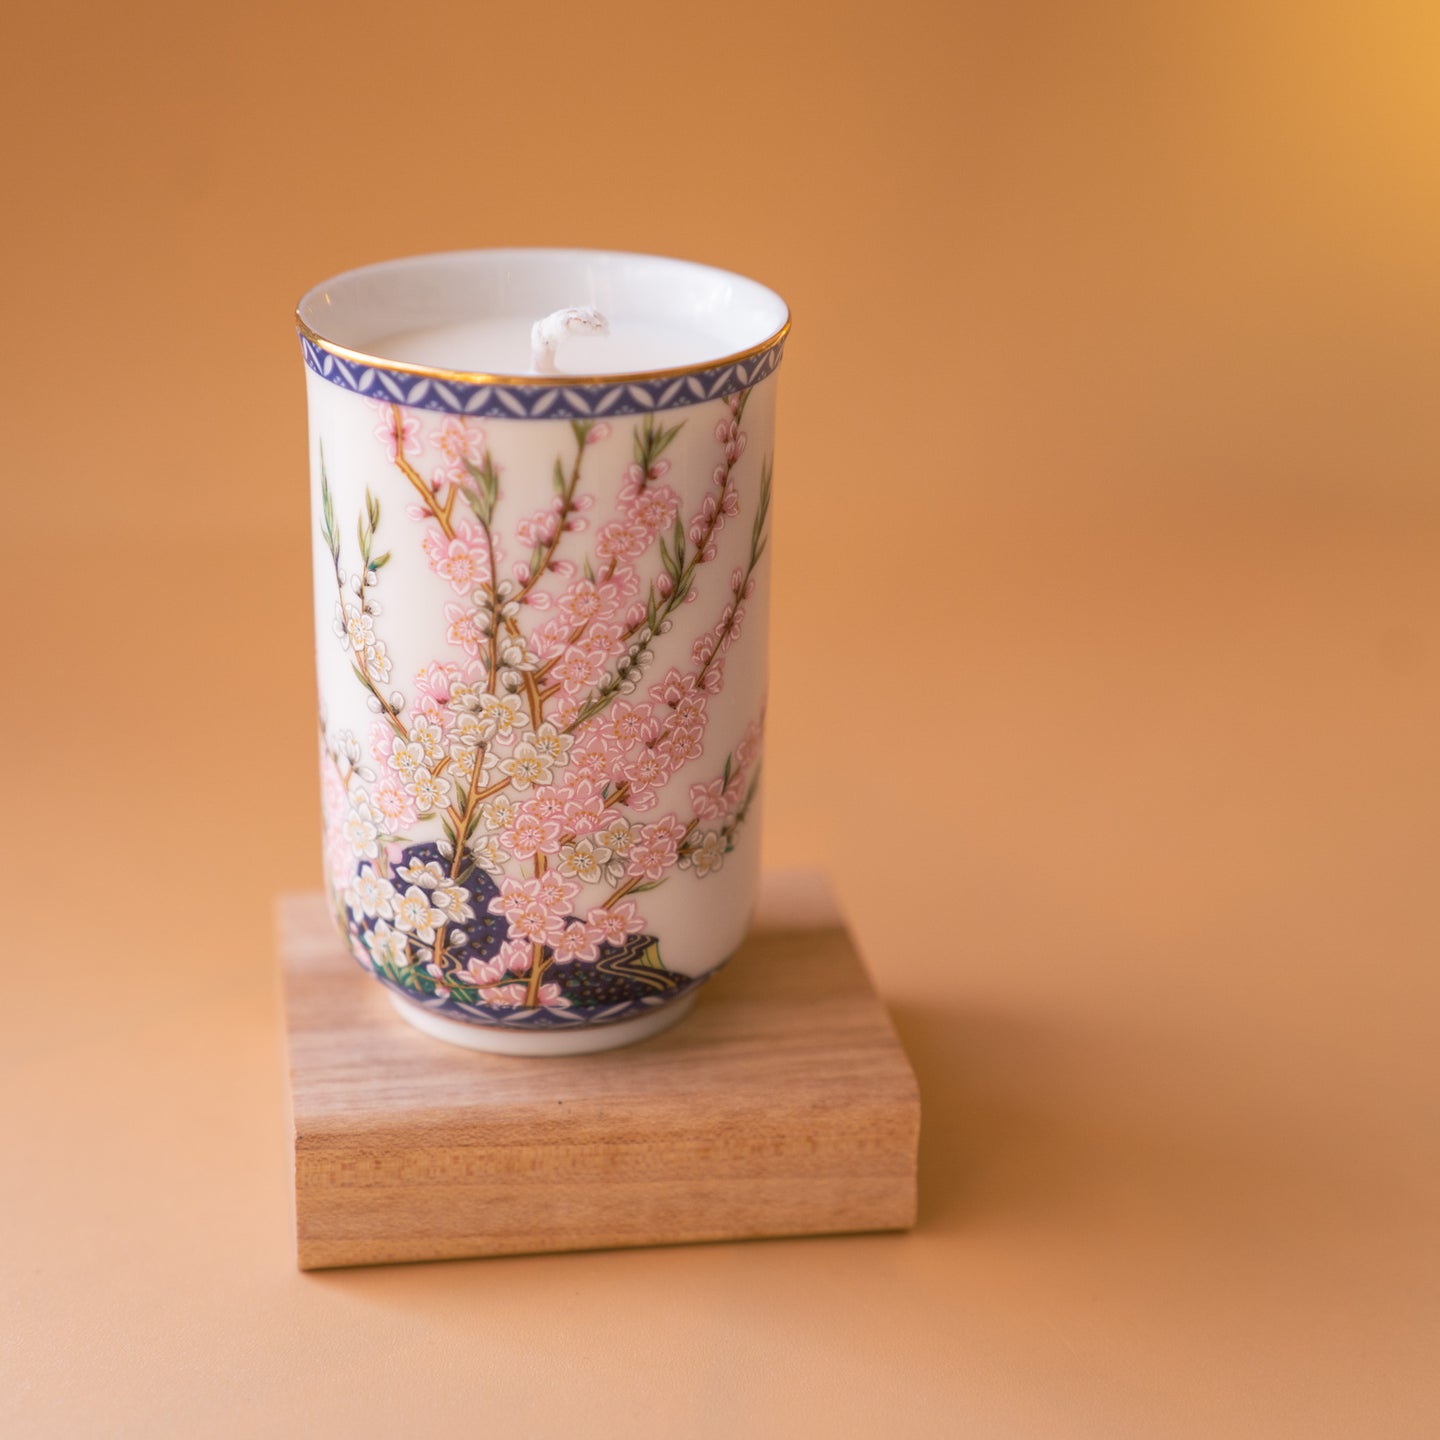 Sairen x Lulumiere Teacup Candle, Peony No.5